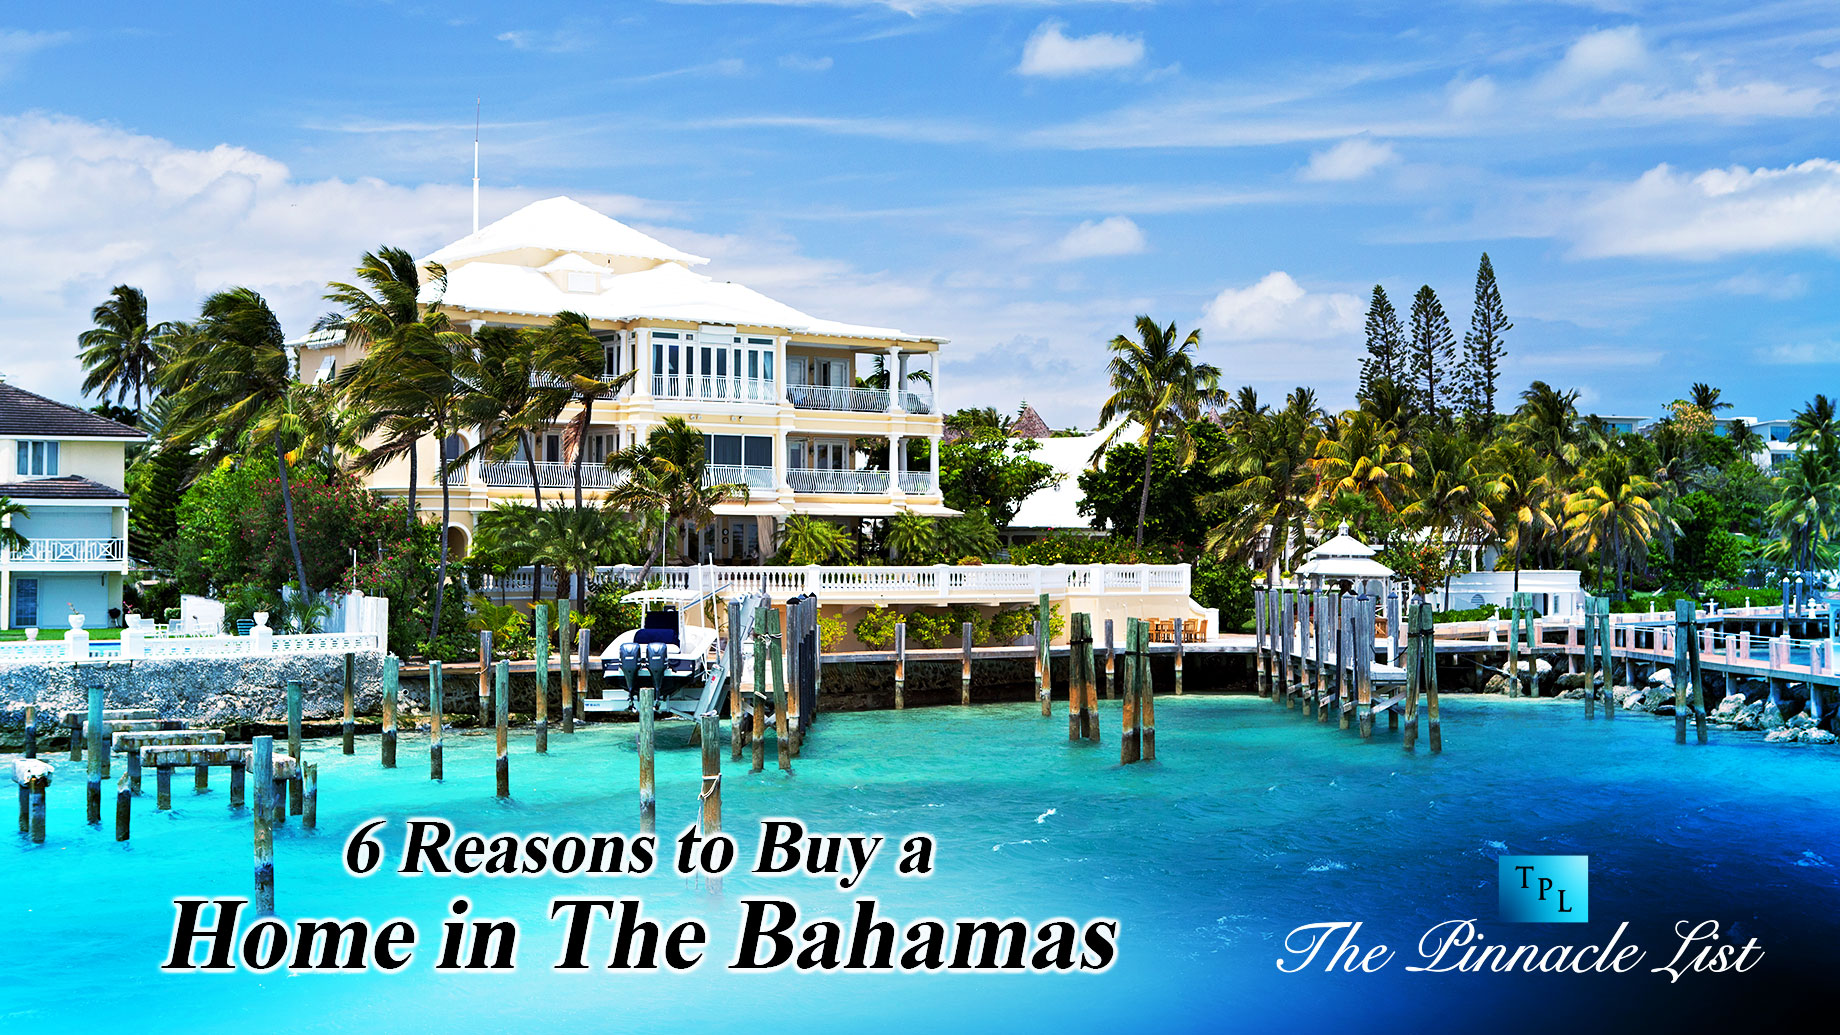 6 Reasons to Buy a Home in The Bahamas